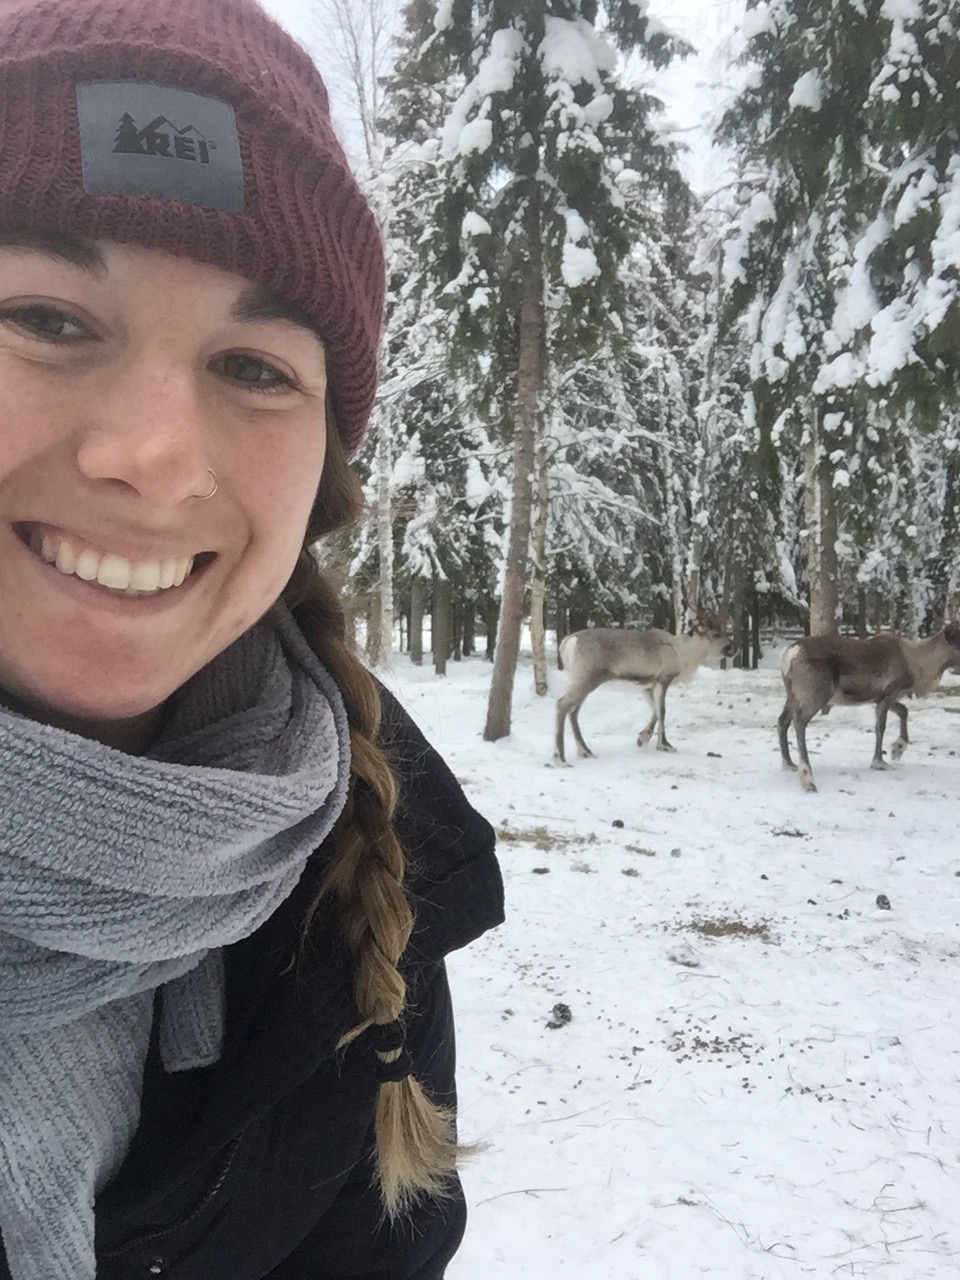 UJ Student with Caribou in the background